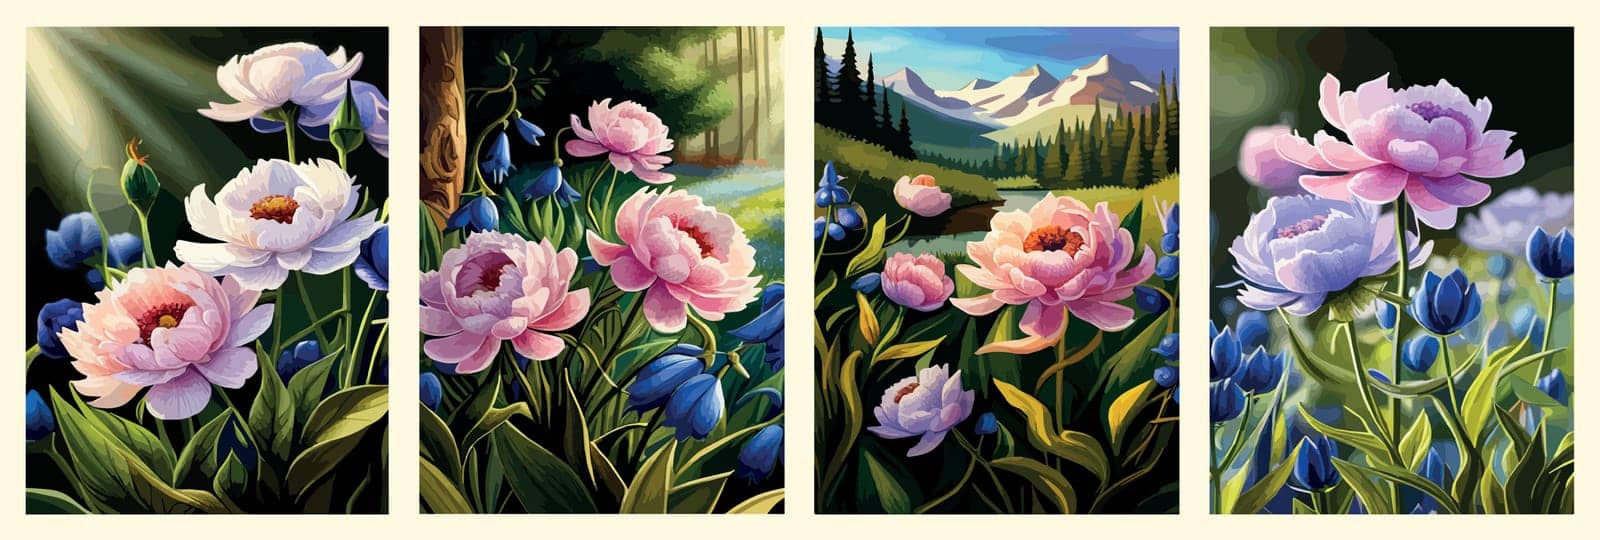 Banner set Beautiful Pink Peony Flower in grass patch at edge forest on bright sunny day. Vector illustration